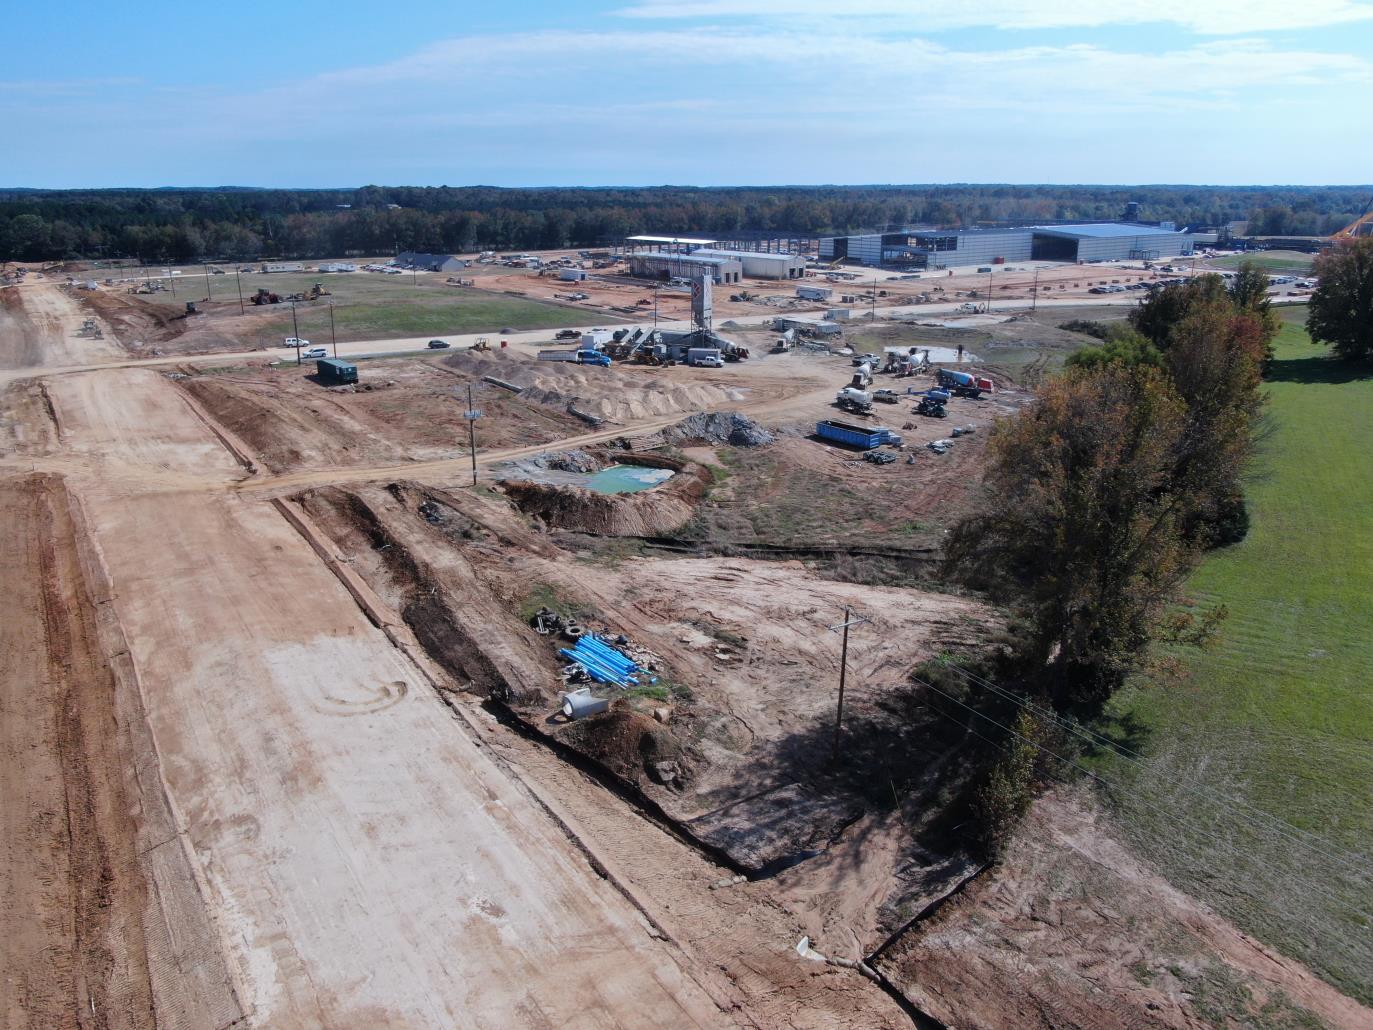 Ensuring powerlines were carefully placed to stay clear of sawmill facilities was a critical part of the project.